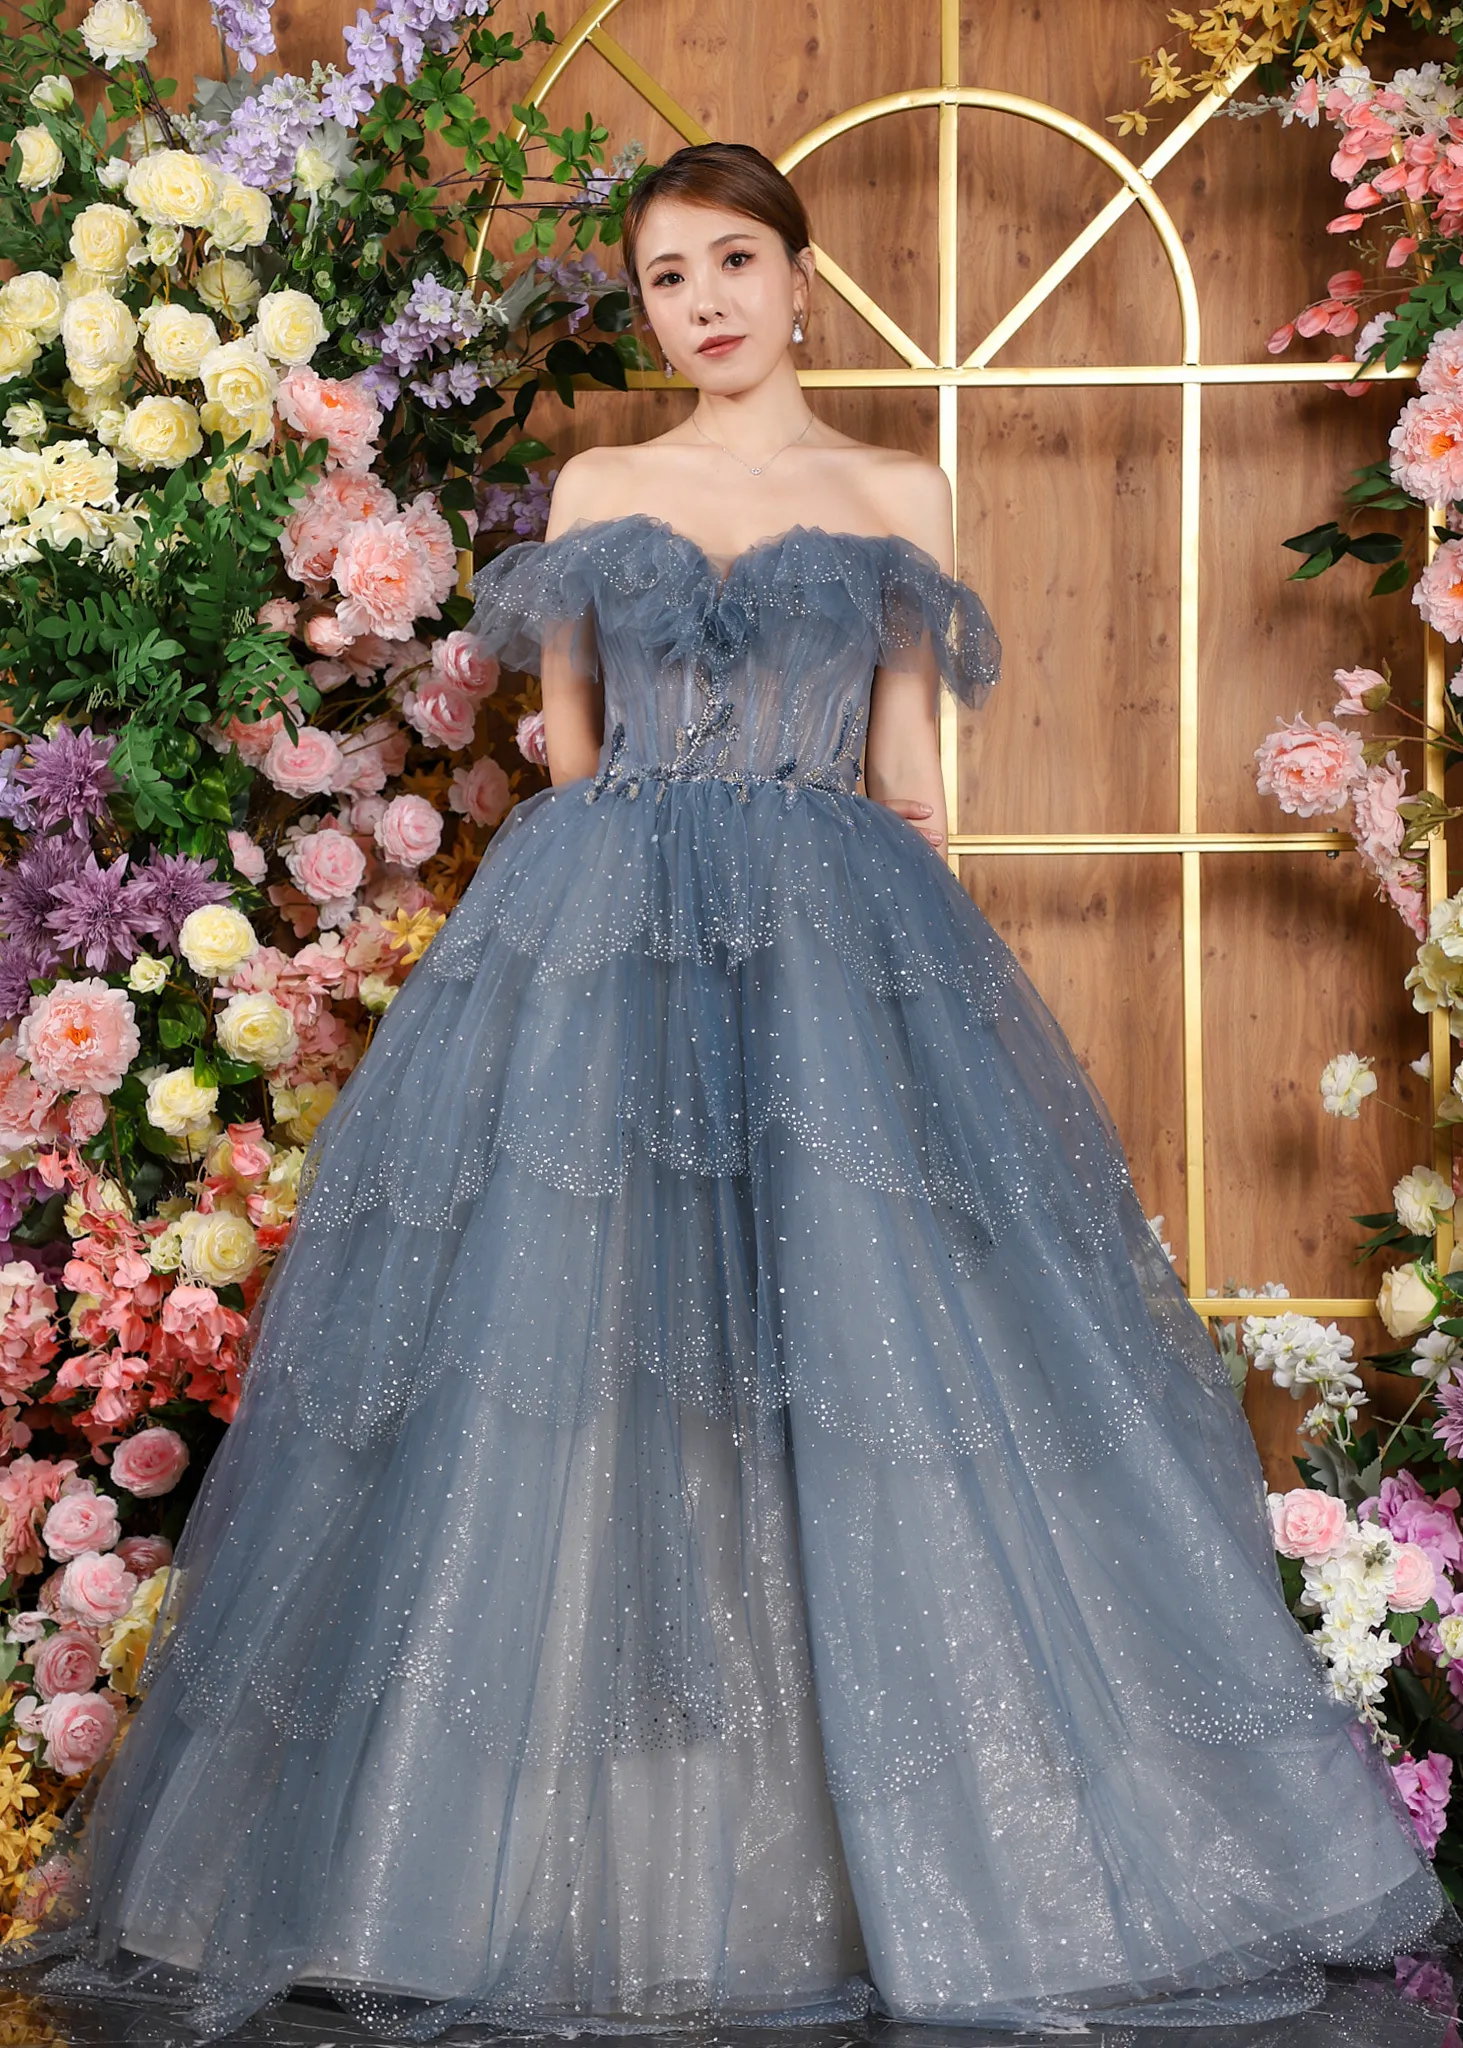 Party Dresses Women Long Blue Tulle Off Shoulder A-Line Empire Prom Sparkly Sequin Evening Dresses Party Graduation Formal Ball Gown 230310